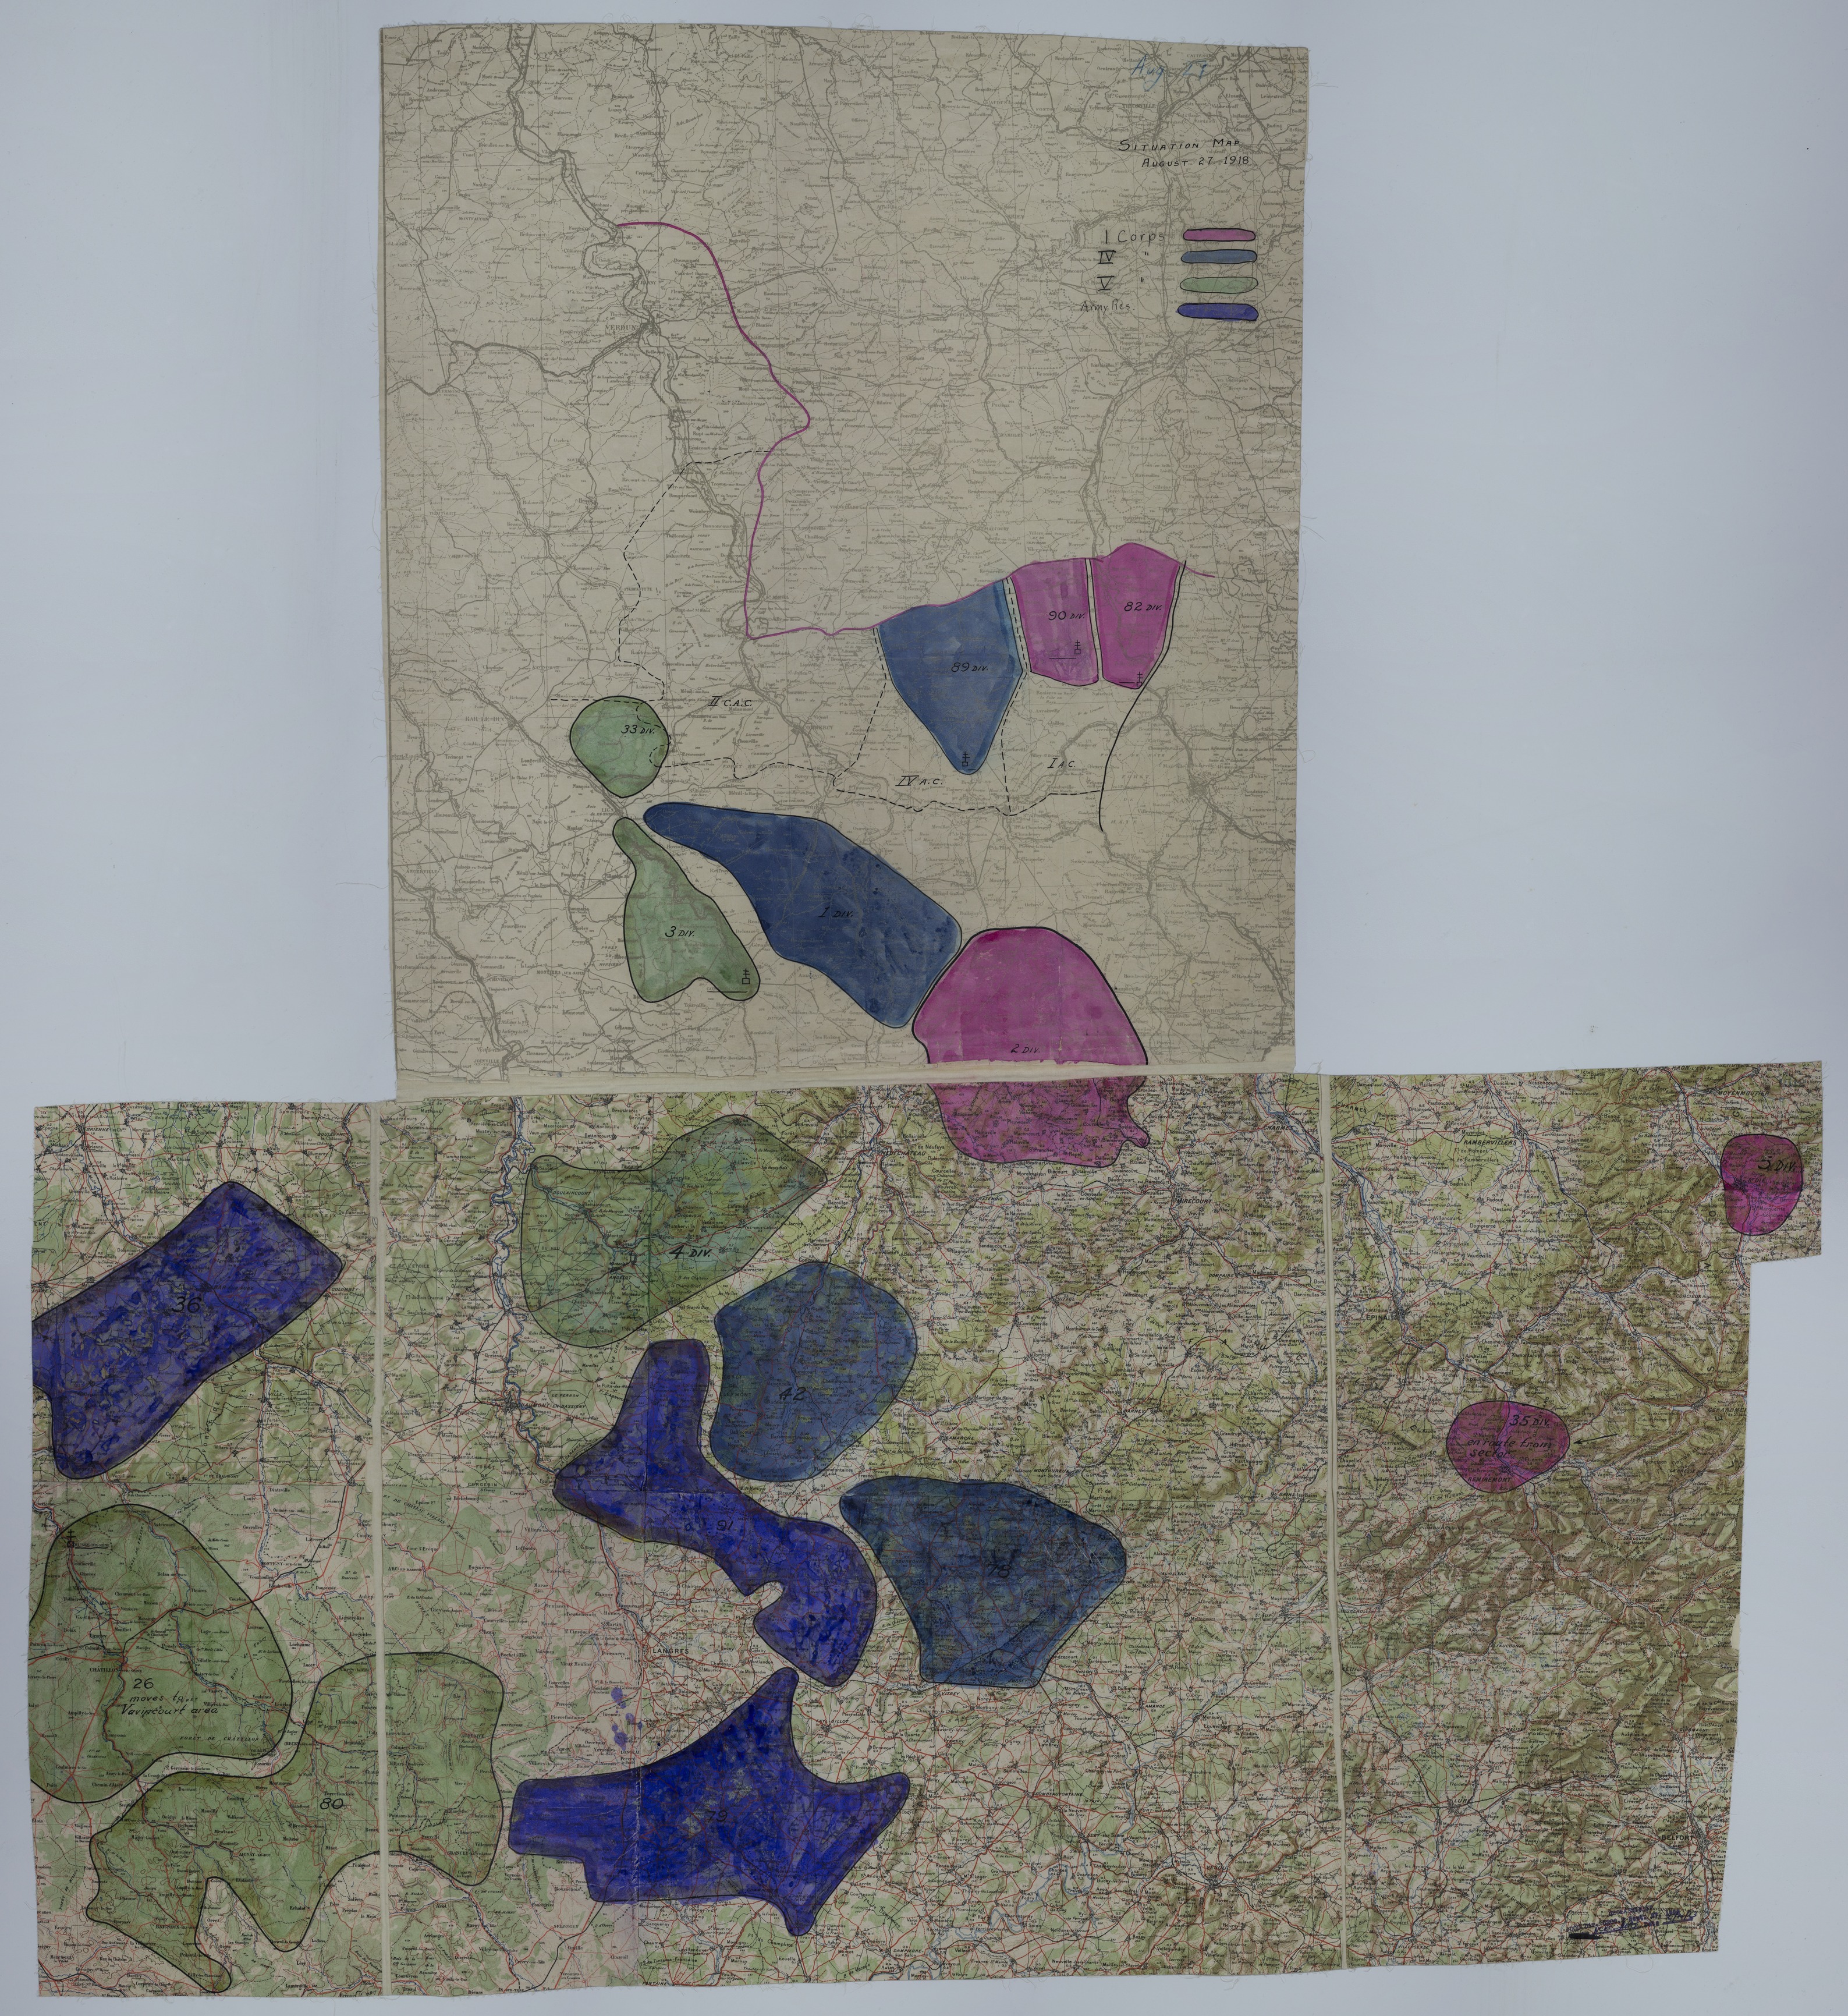 Map of Divisional Positions on August 27, 1918